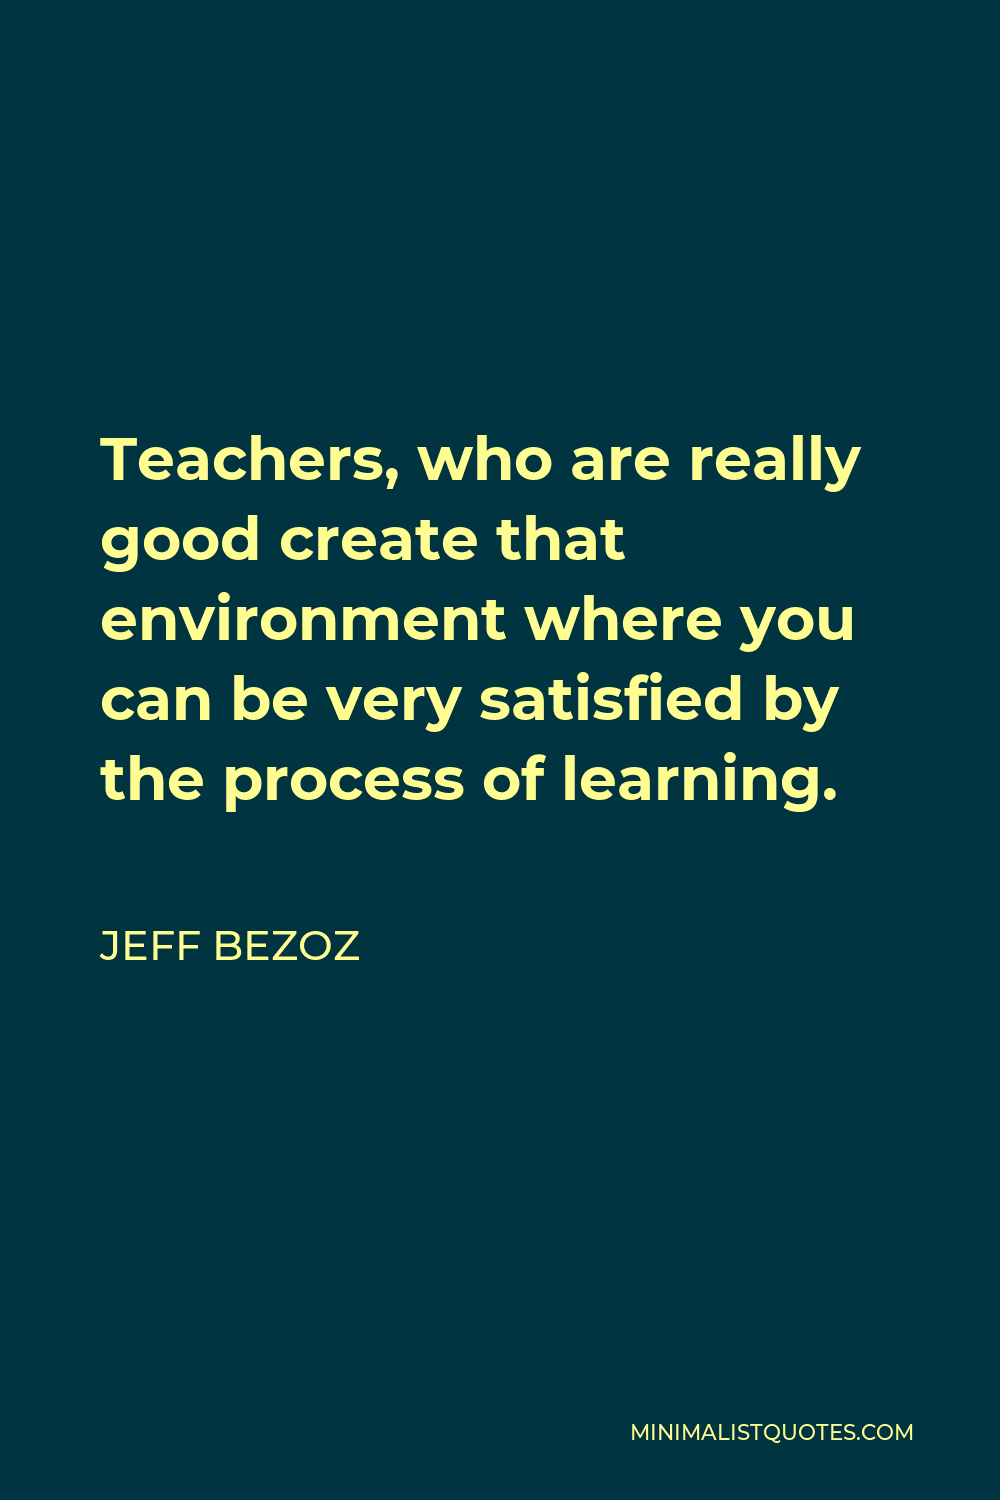 Jeff Bezoz Quote - Teachers, who are really good create that environment where you can be very satisfied by the process of learning.